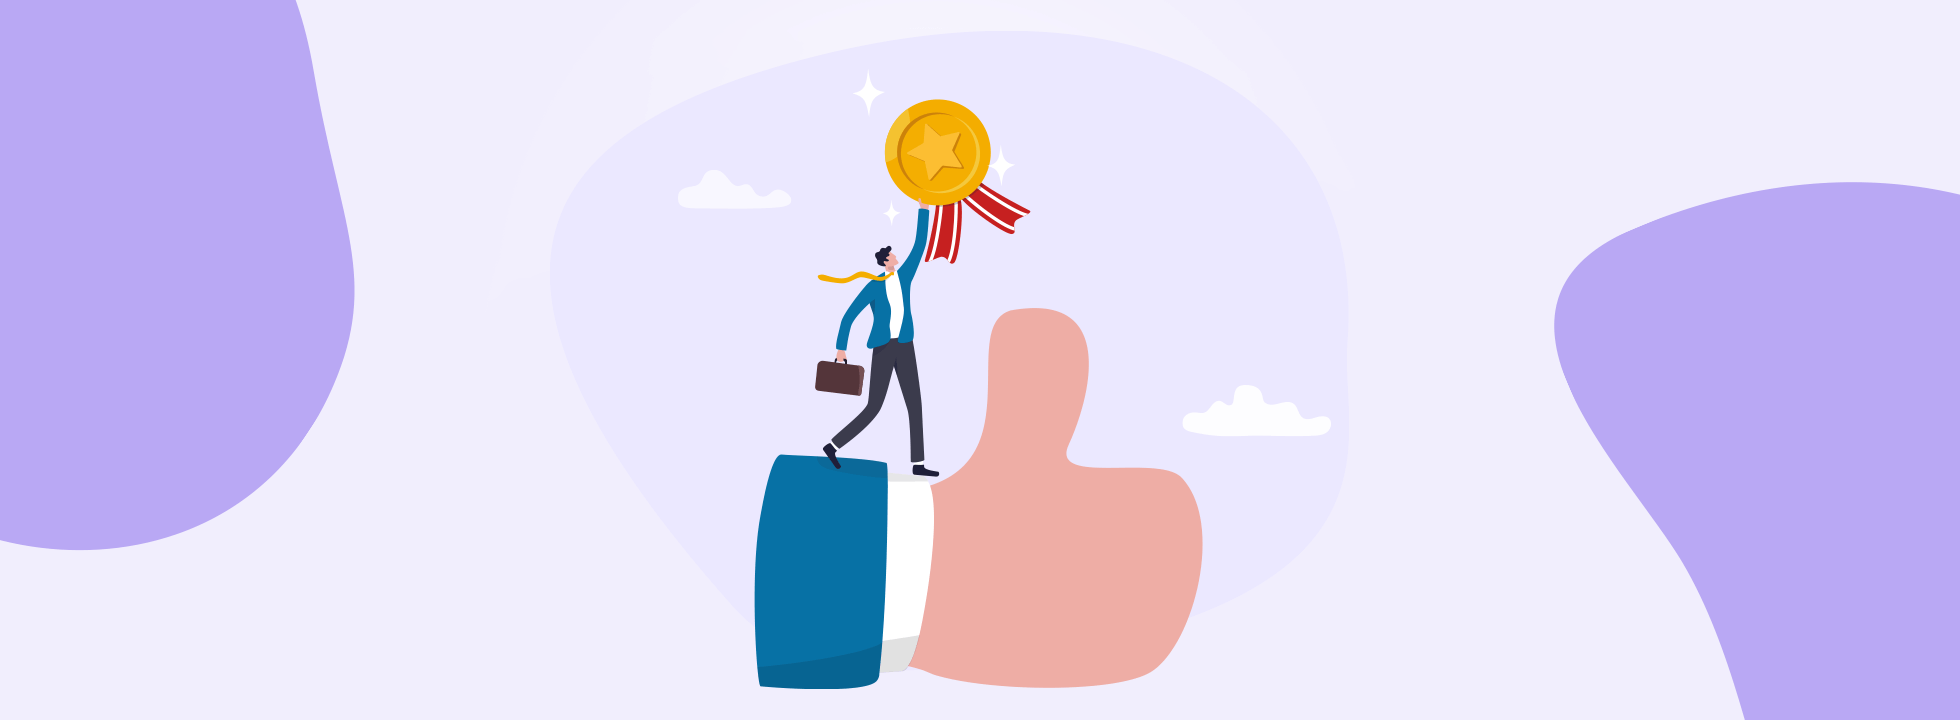 Animated businessman holding a gold medal above his head while standing on an animated 'thumbs up' gesture.